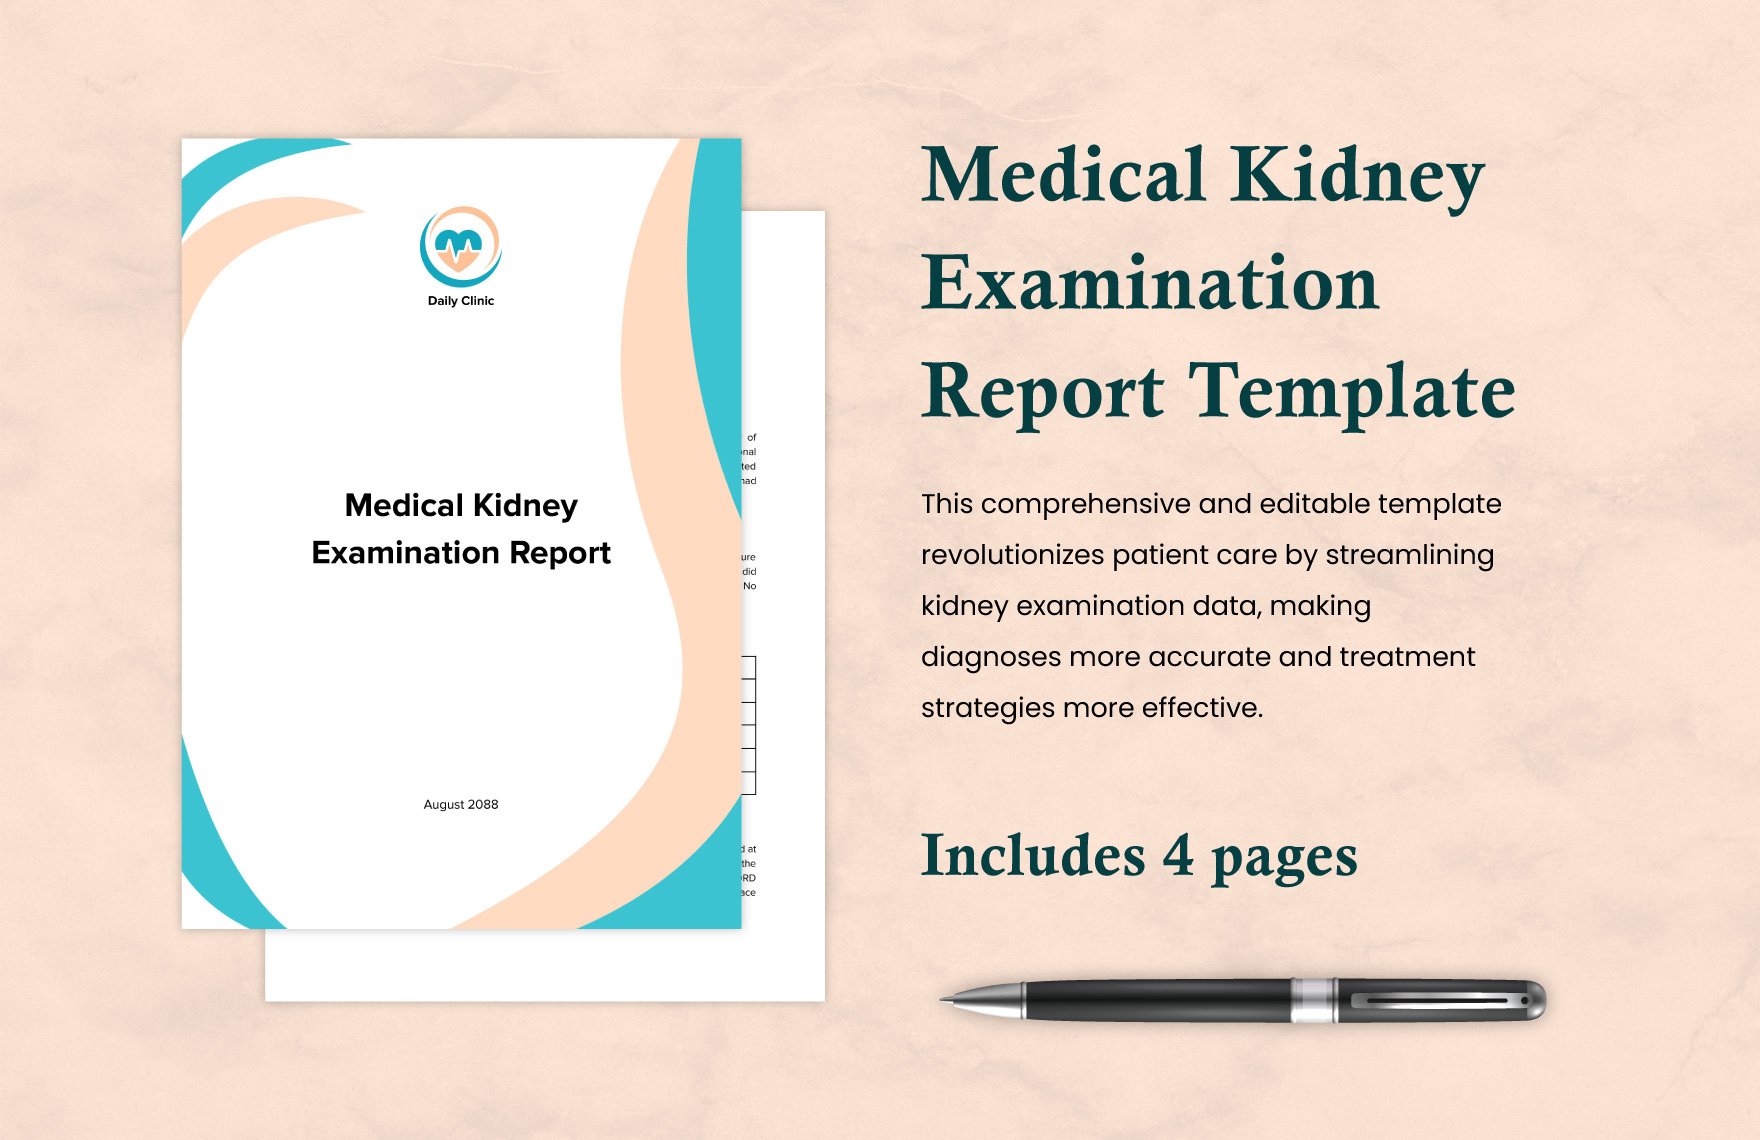 Medical Kidney Examination Report Template